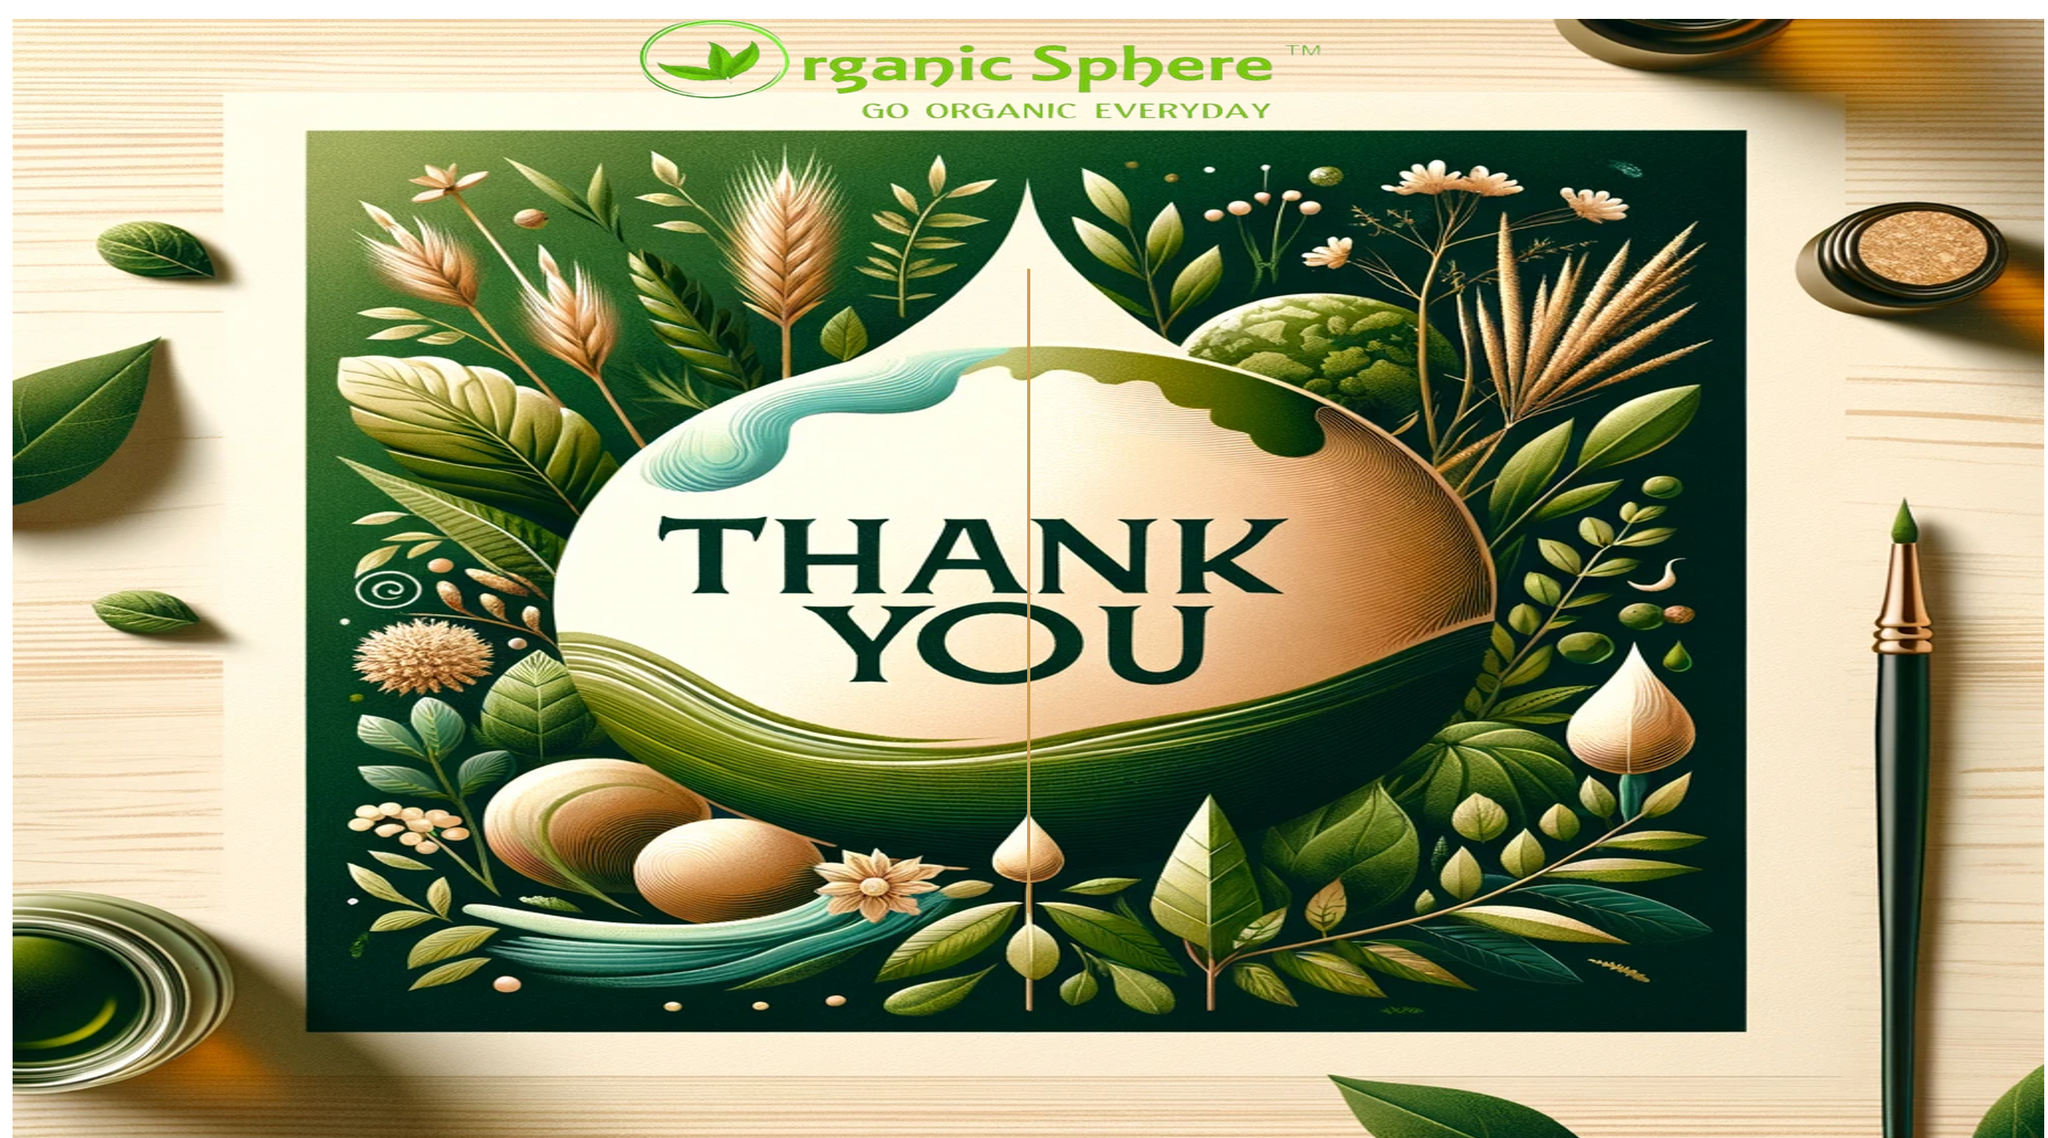 The Heartbeat of Organic Sphere: A Tribute to Our Customers